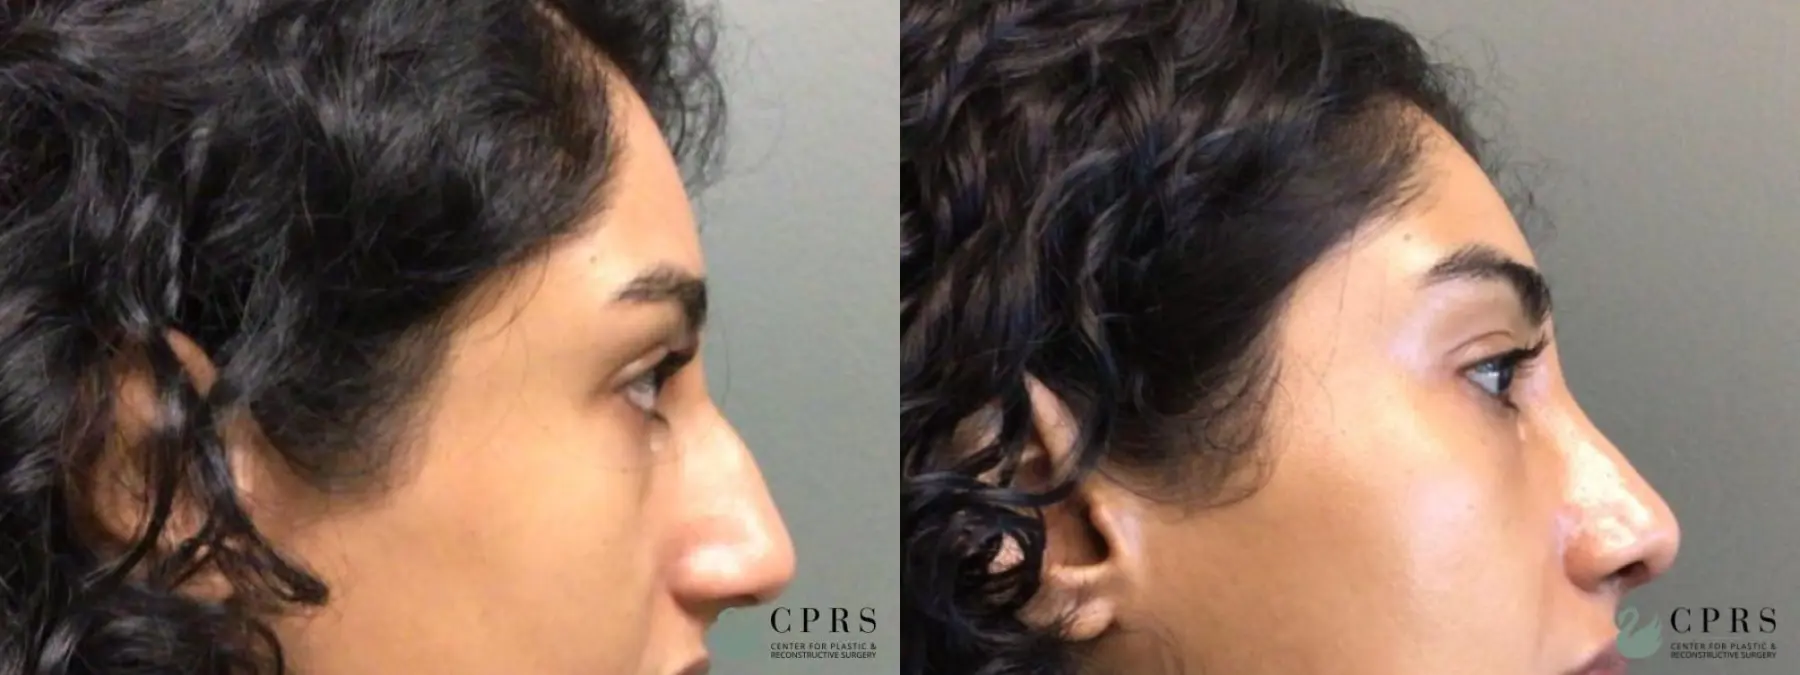 Rhinoplasty: Patient 17 - Before and After 1